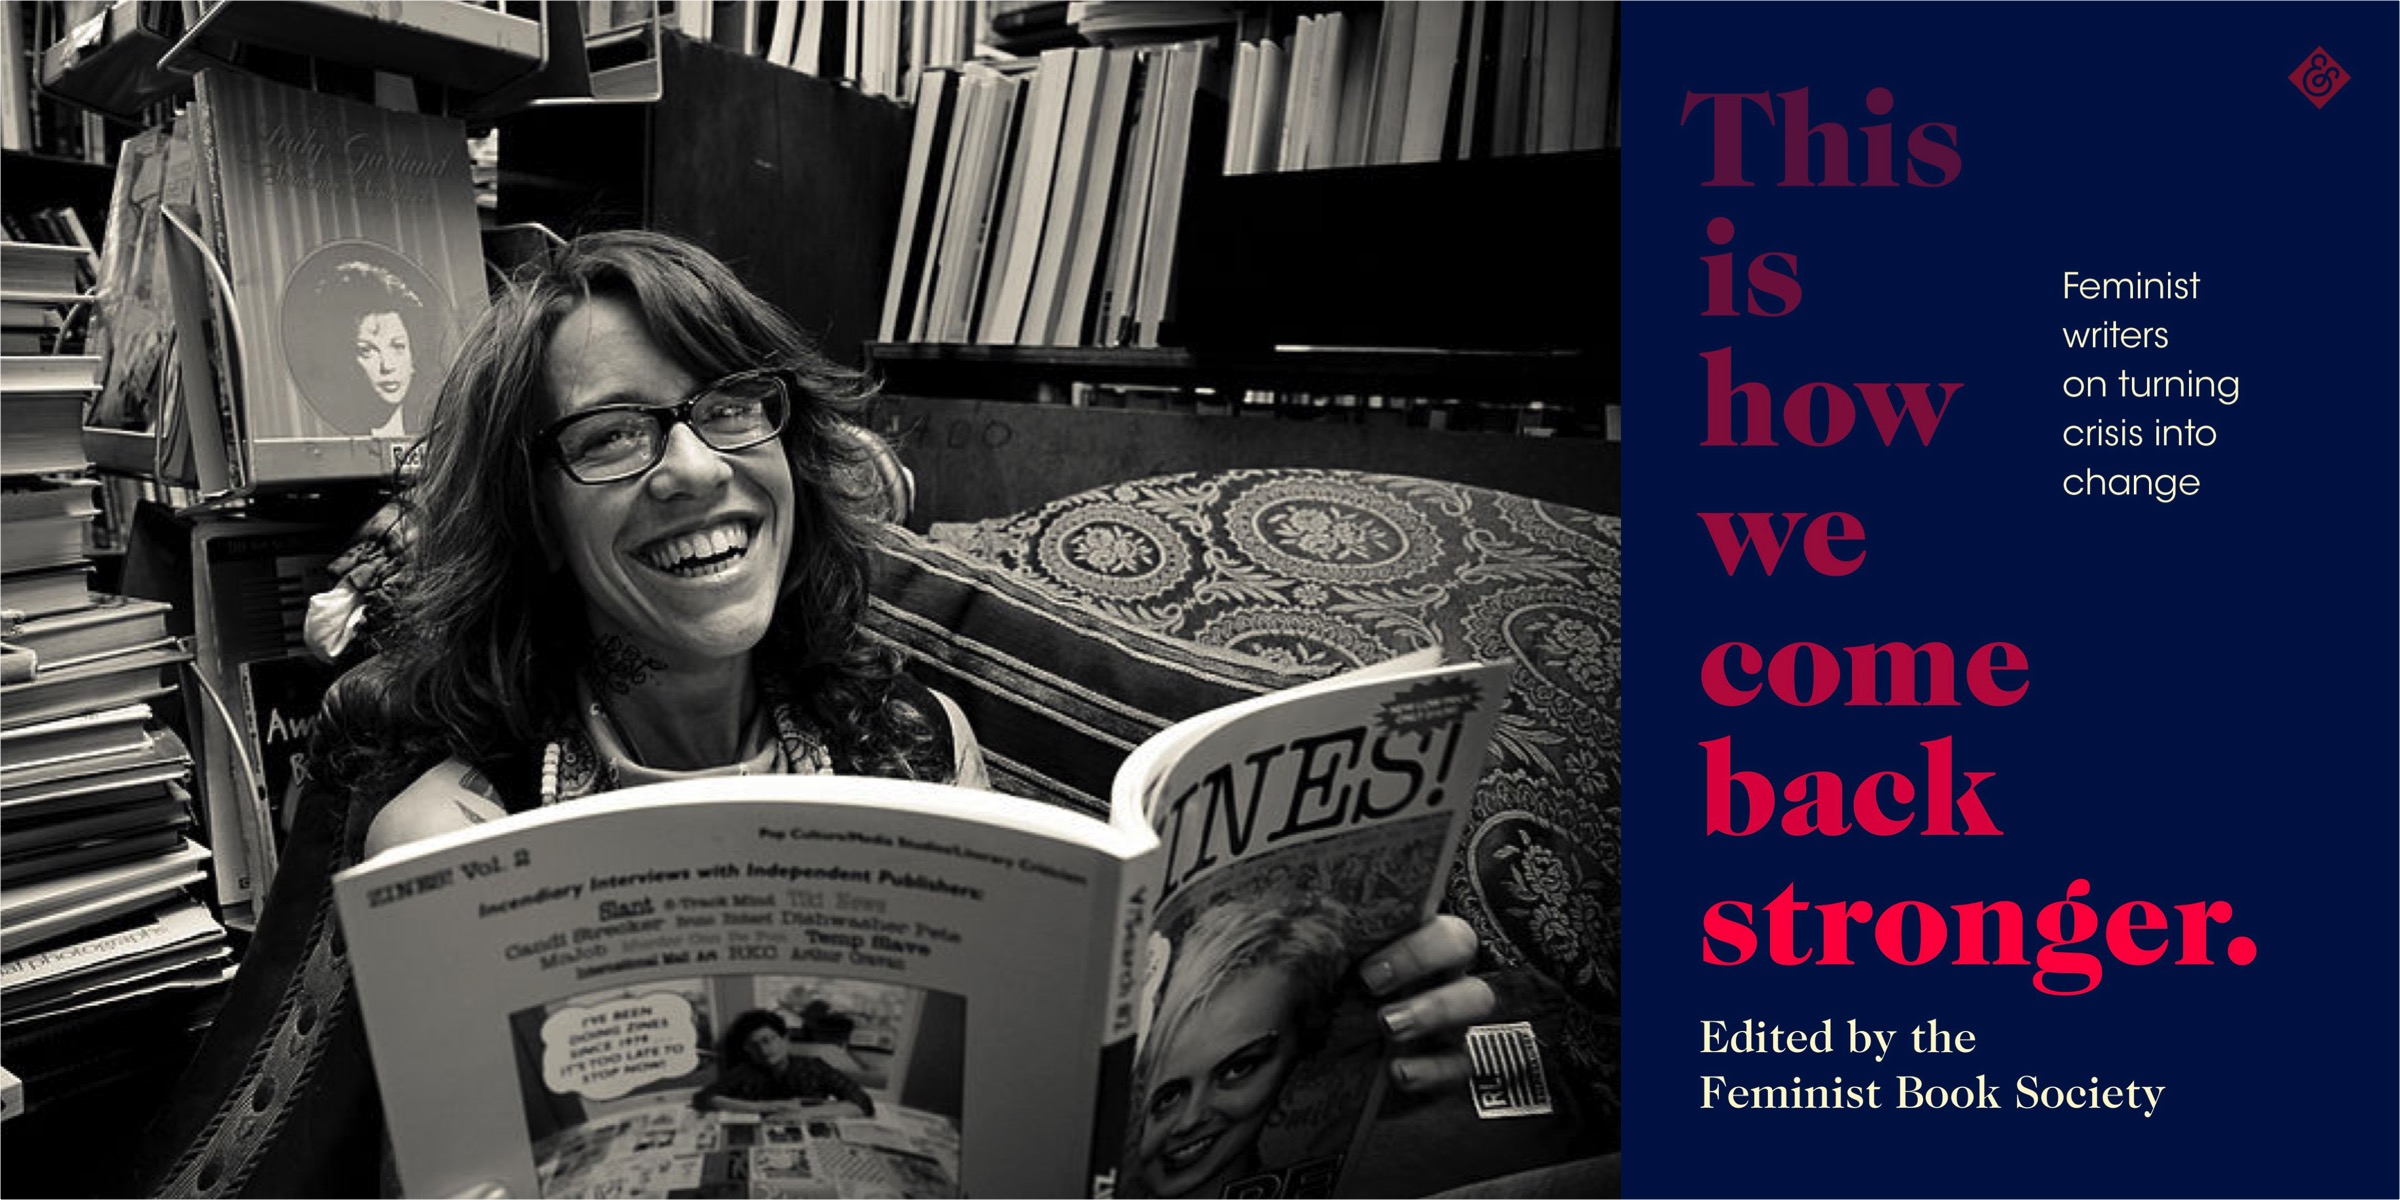 A black-and-white photo of Michelle Tea seated in a room full of books with a large-format book in her hands, leaning back and laughing; the photo is juxtaposed with the cover of the book This Is How We Come Back Stronger